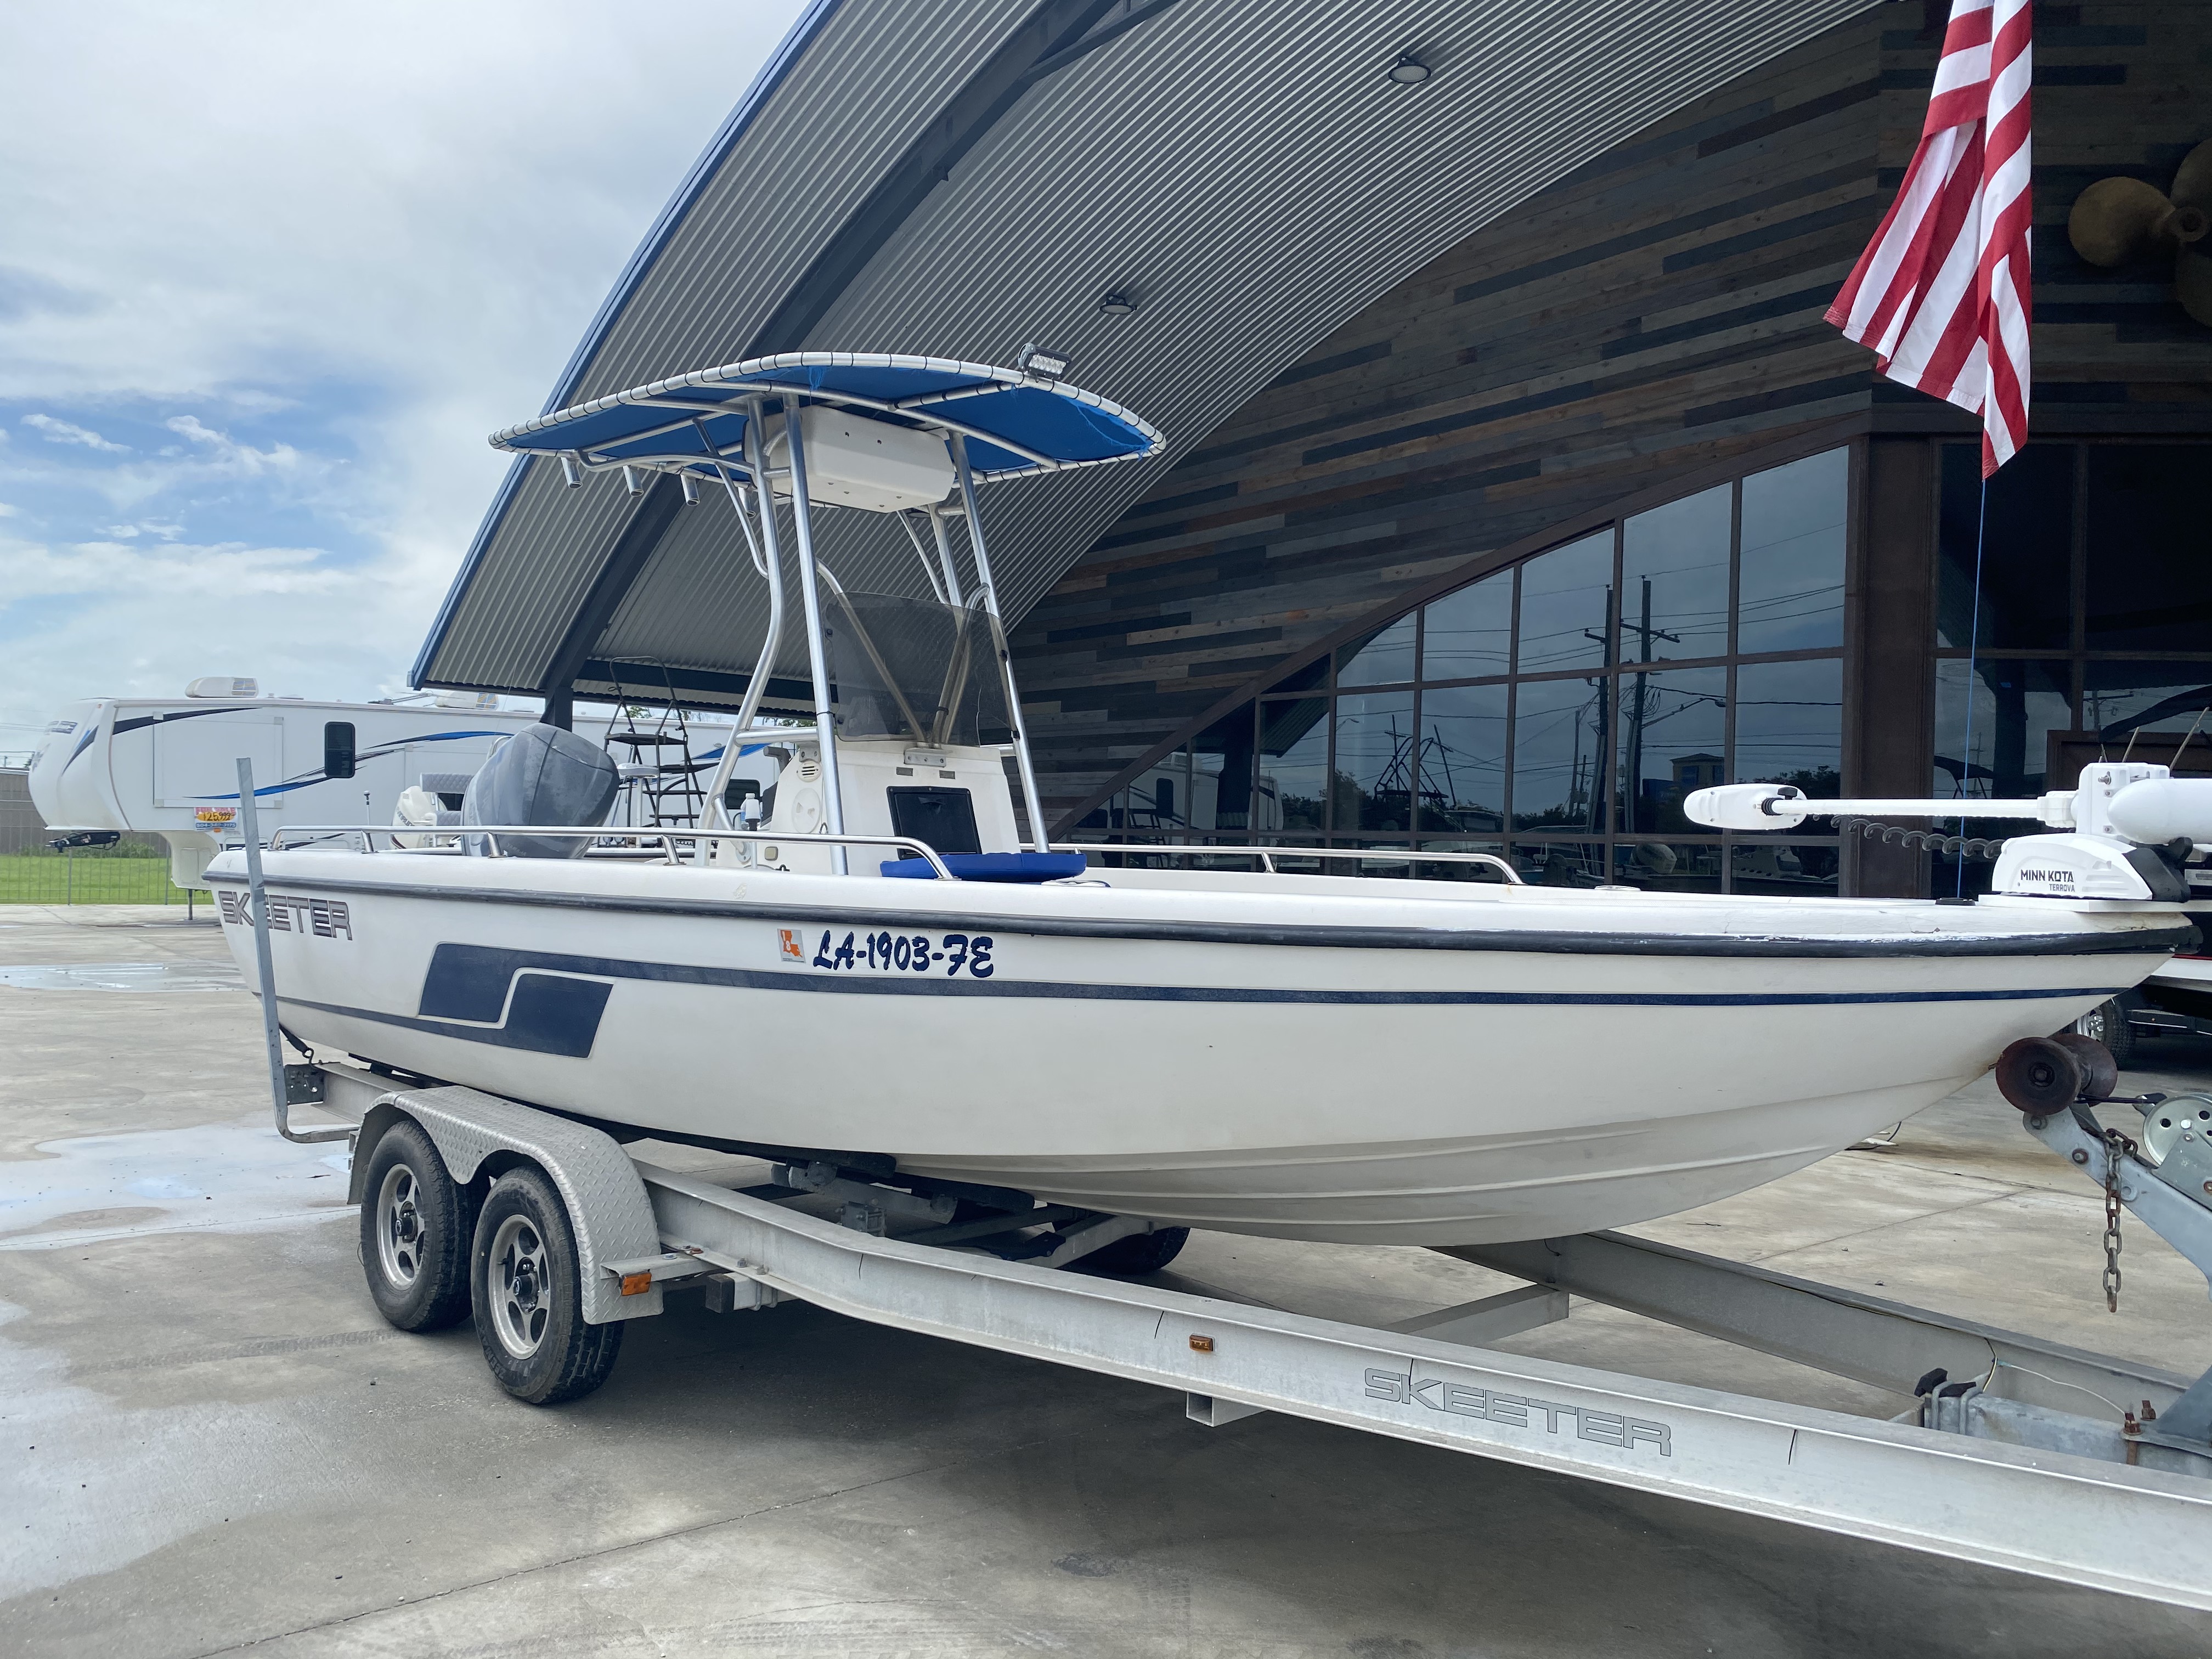 2001 Skeeter boat for sale, model of the boat is ZX22 & Image # 12 of 19